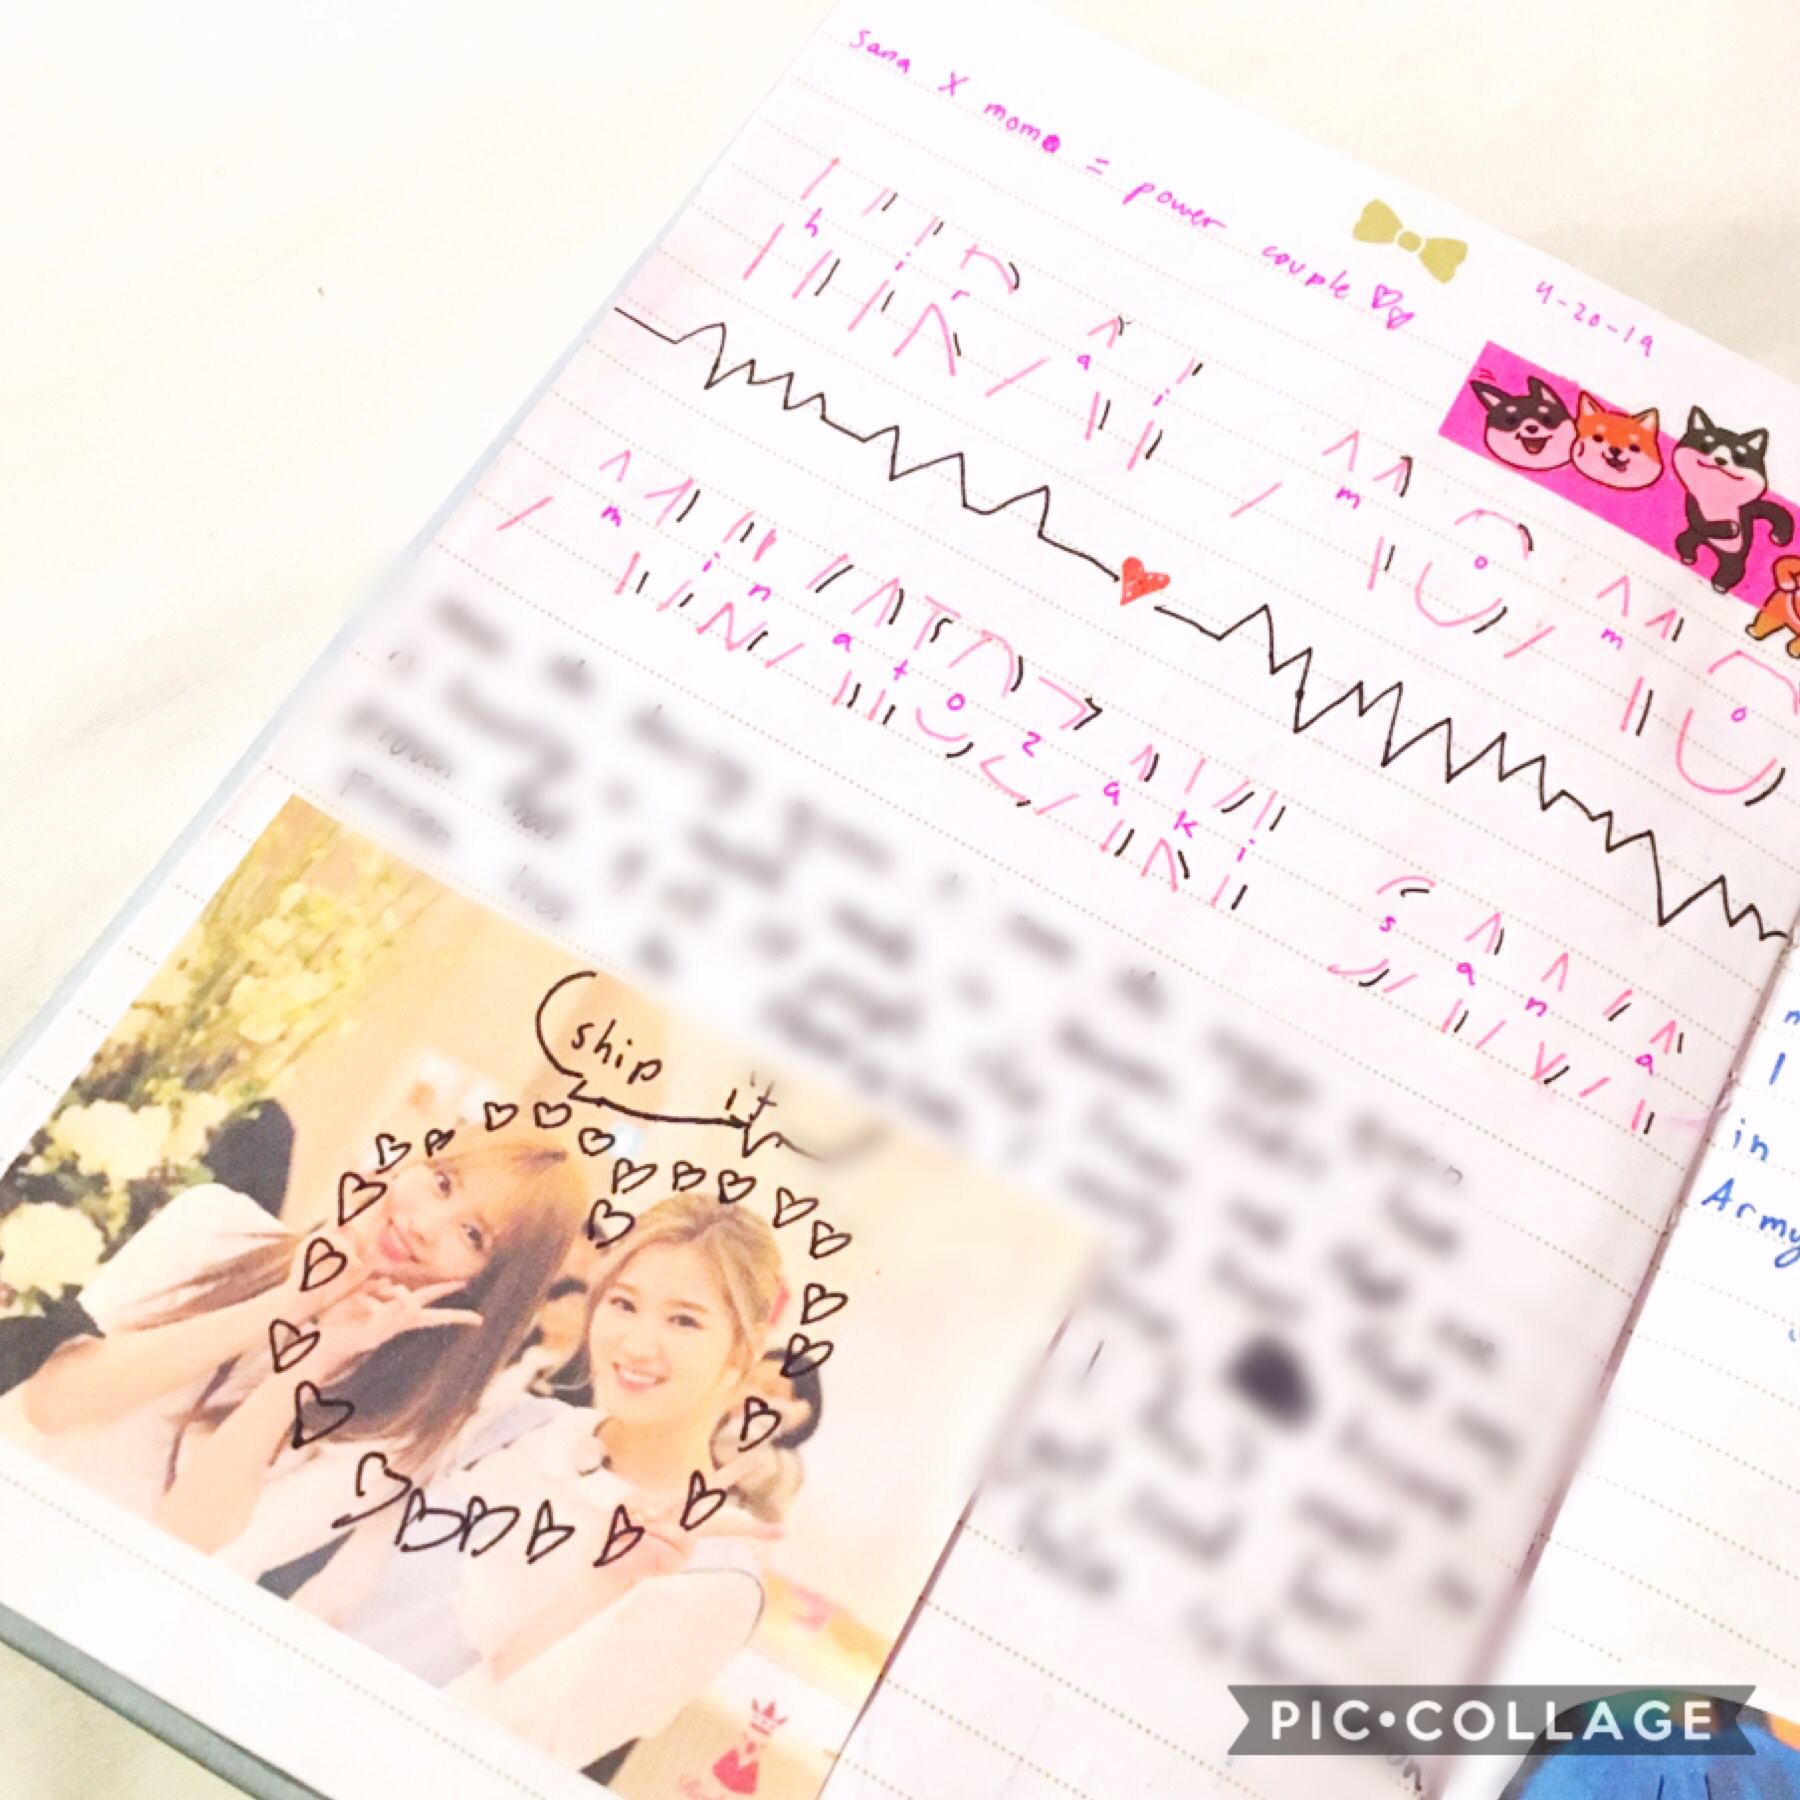 hello! here is a twice spread i did. i decided the blur out what i wrote bc its so embarrassing 😂💗